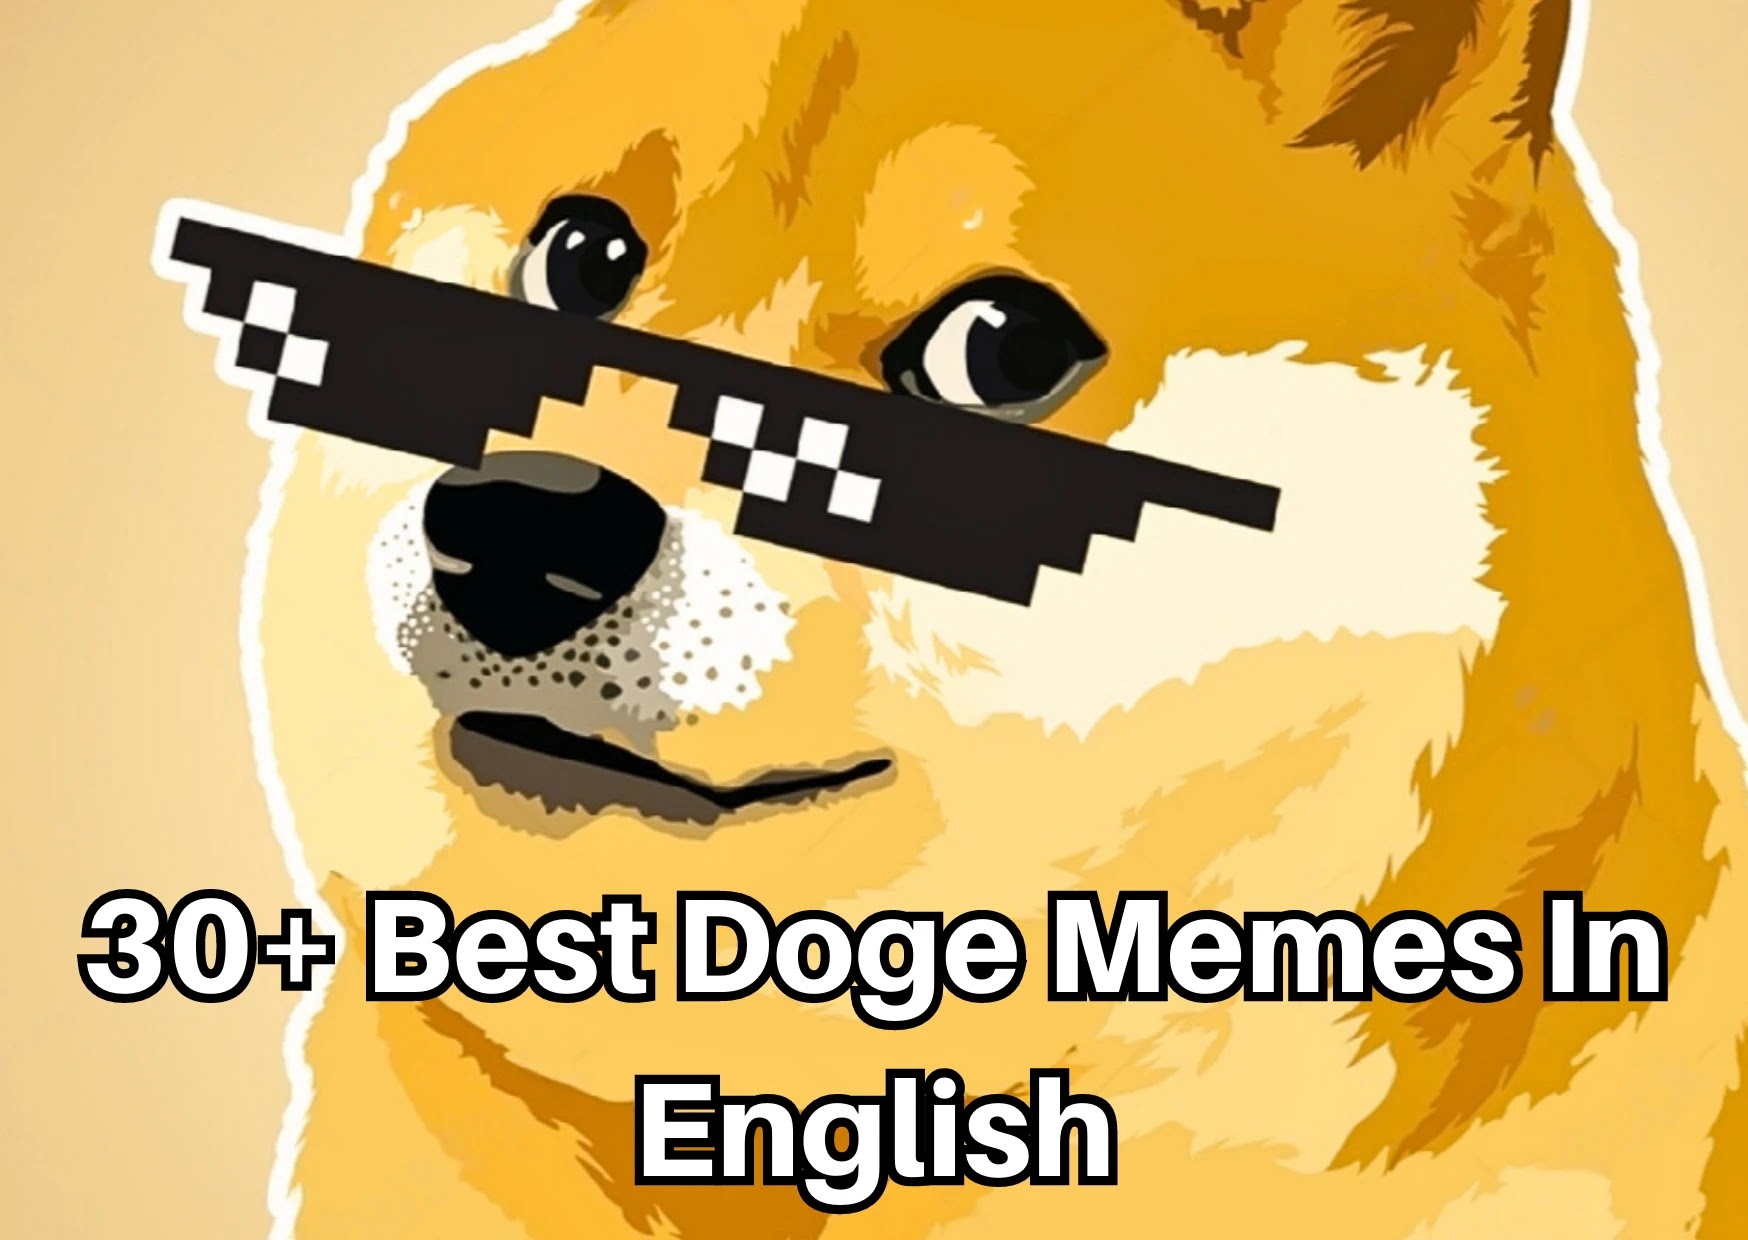 30+ Best Doge Memes in English